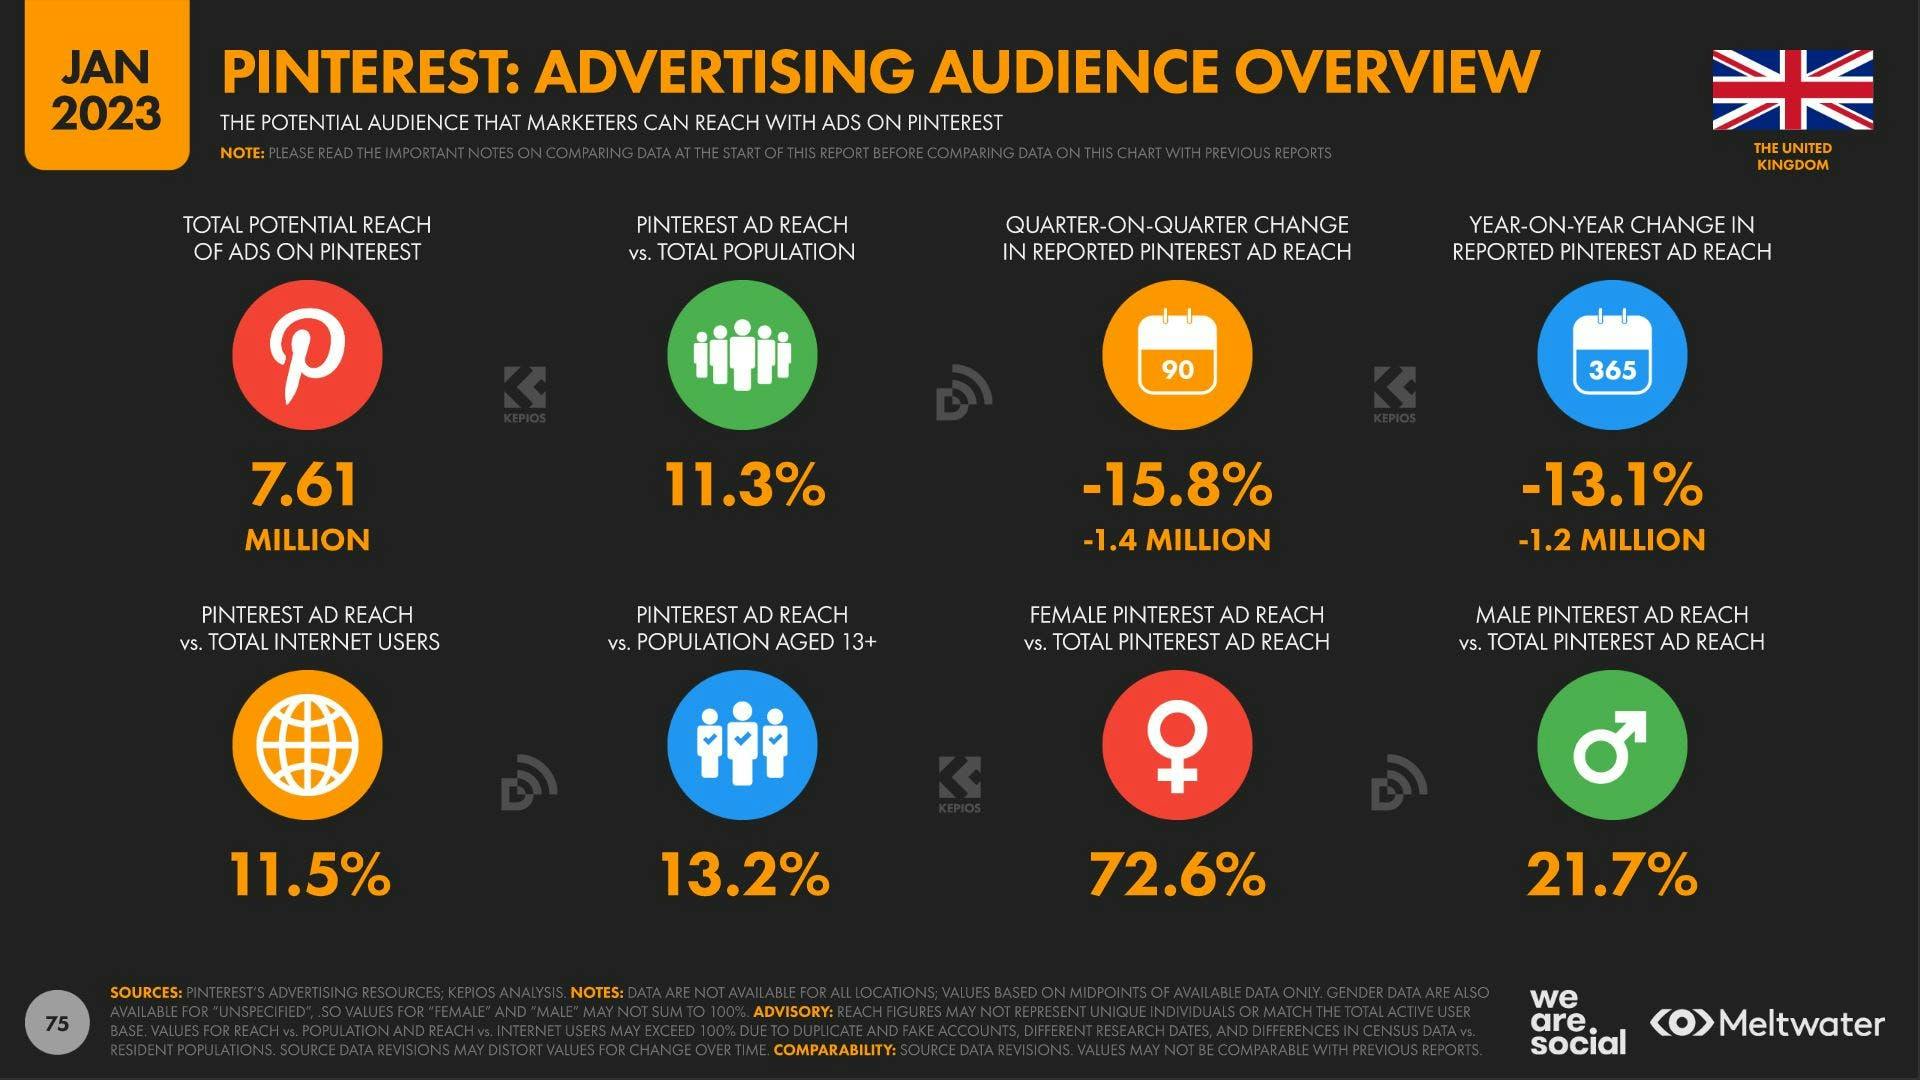 Pinterest Advertising Audience Overview